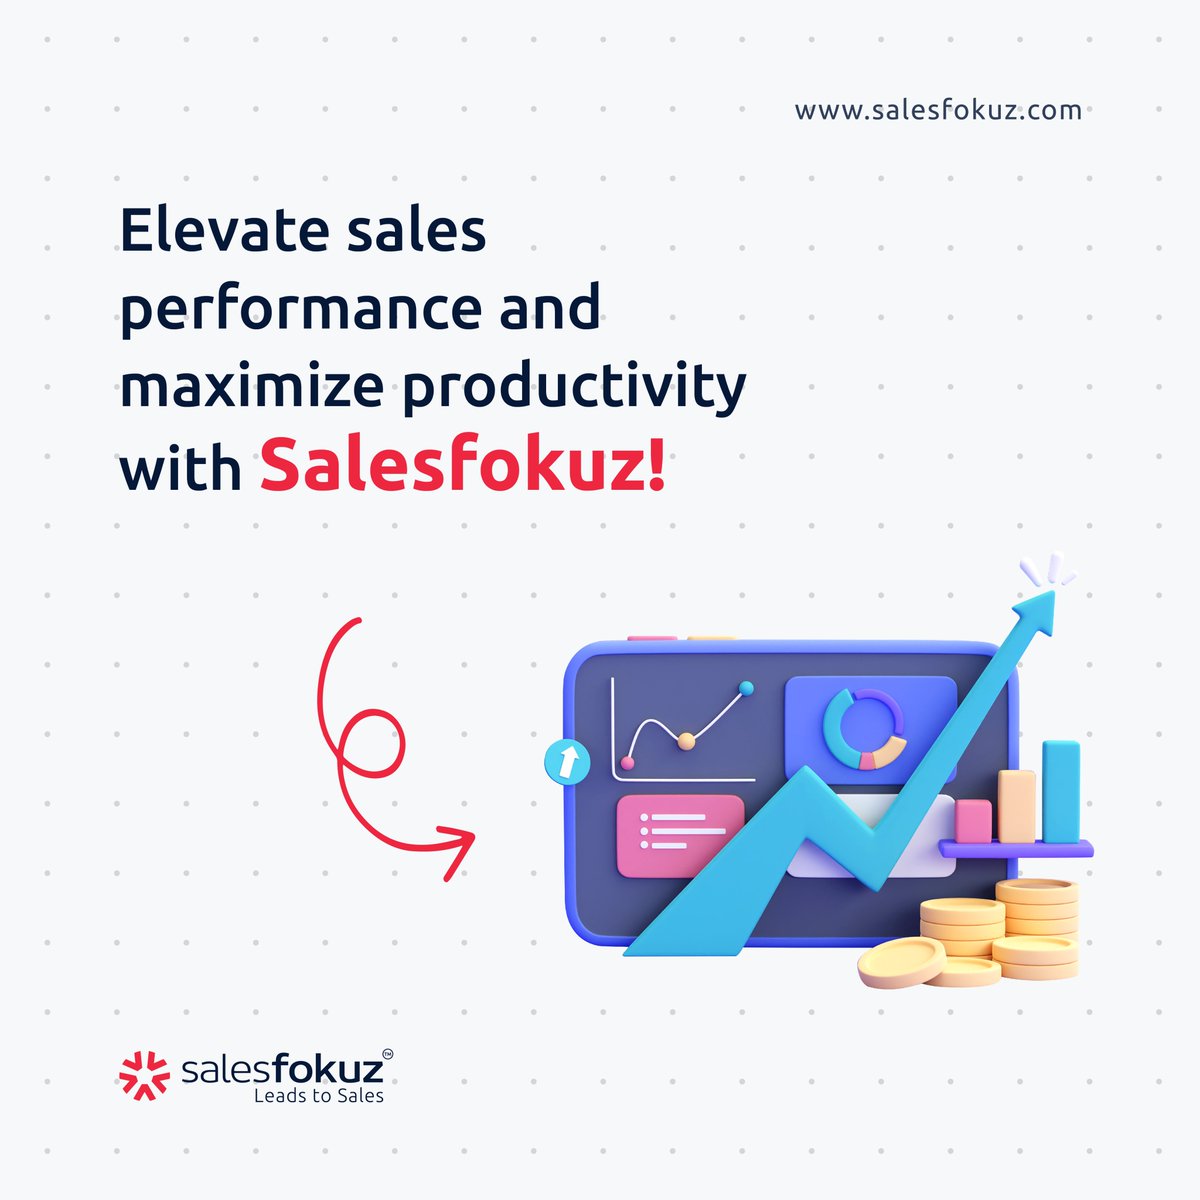 Improve sales and productivity efficiently with the power of a sales management tool to conquer the market height effortlessly. Get Salesfokuz!
Visit: salesfokuz.com/sales-performa…
#SalesPerformanceManagementTool #FieldForceManagement #SalesTracking #SalesApp #FieldForceTracking